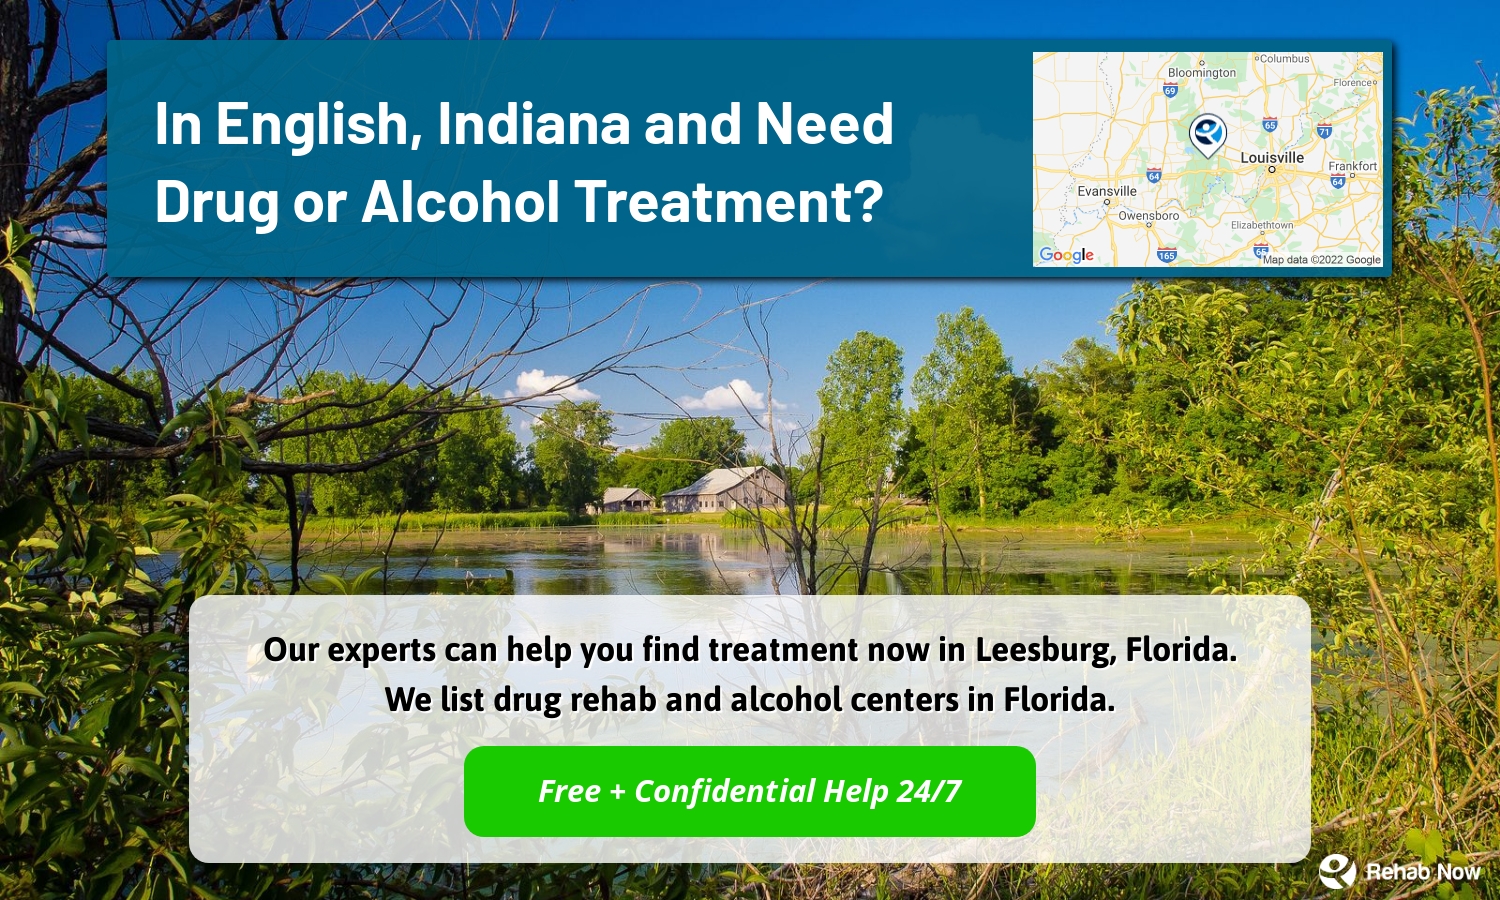 Our experts can help you find treatment now in Leesburg, Florida. We list drug rehab and alcohol centers in Florida.